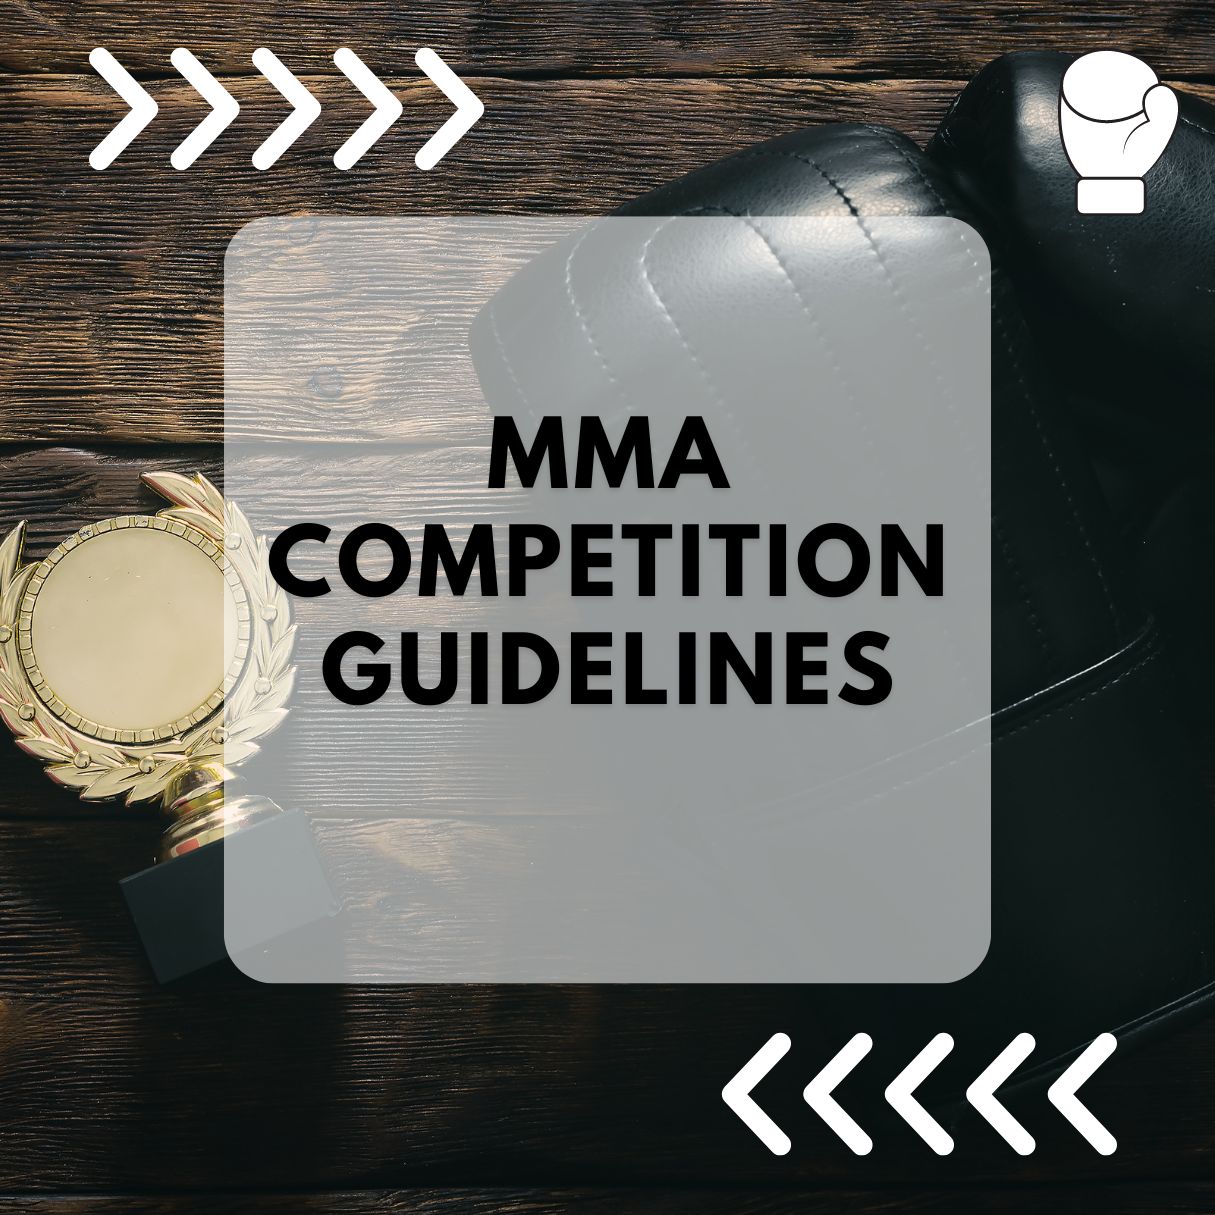 MMA competition guidelines